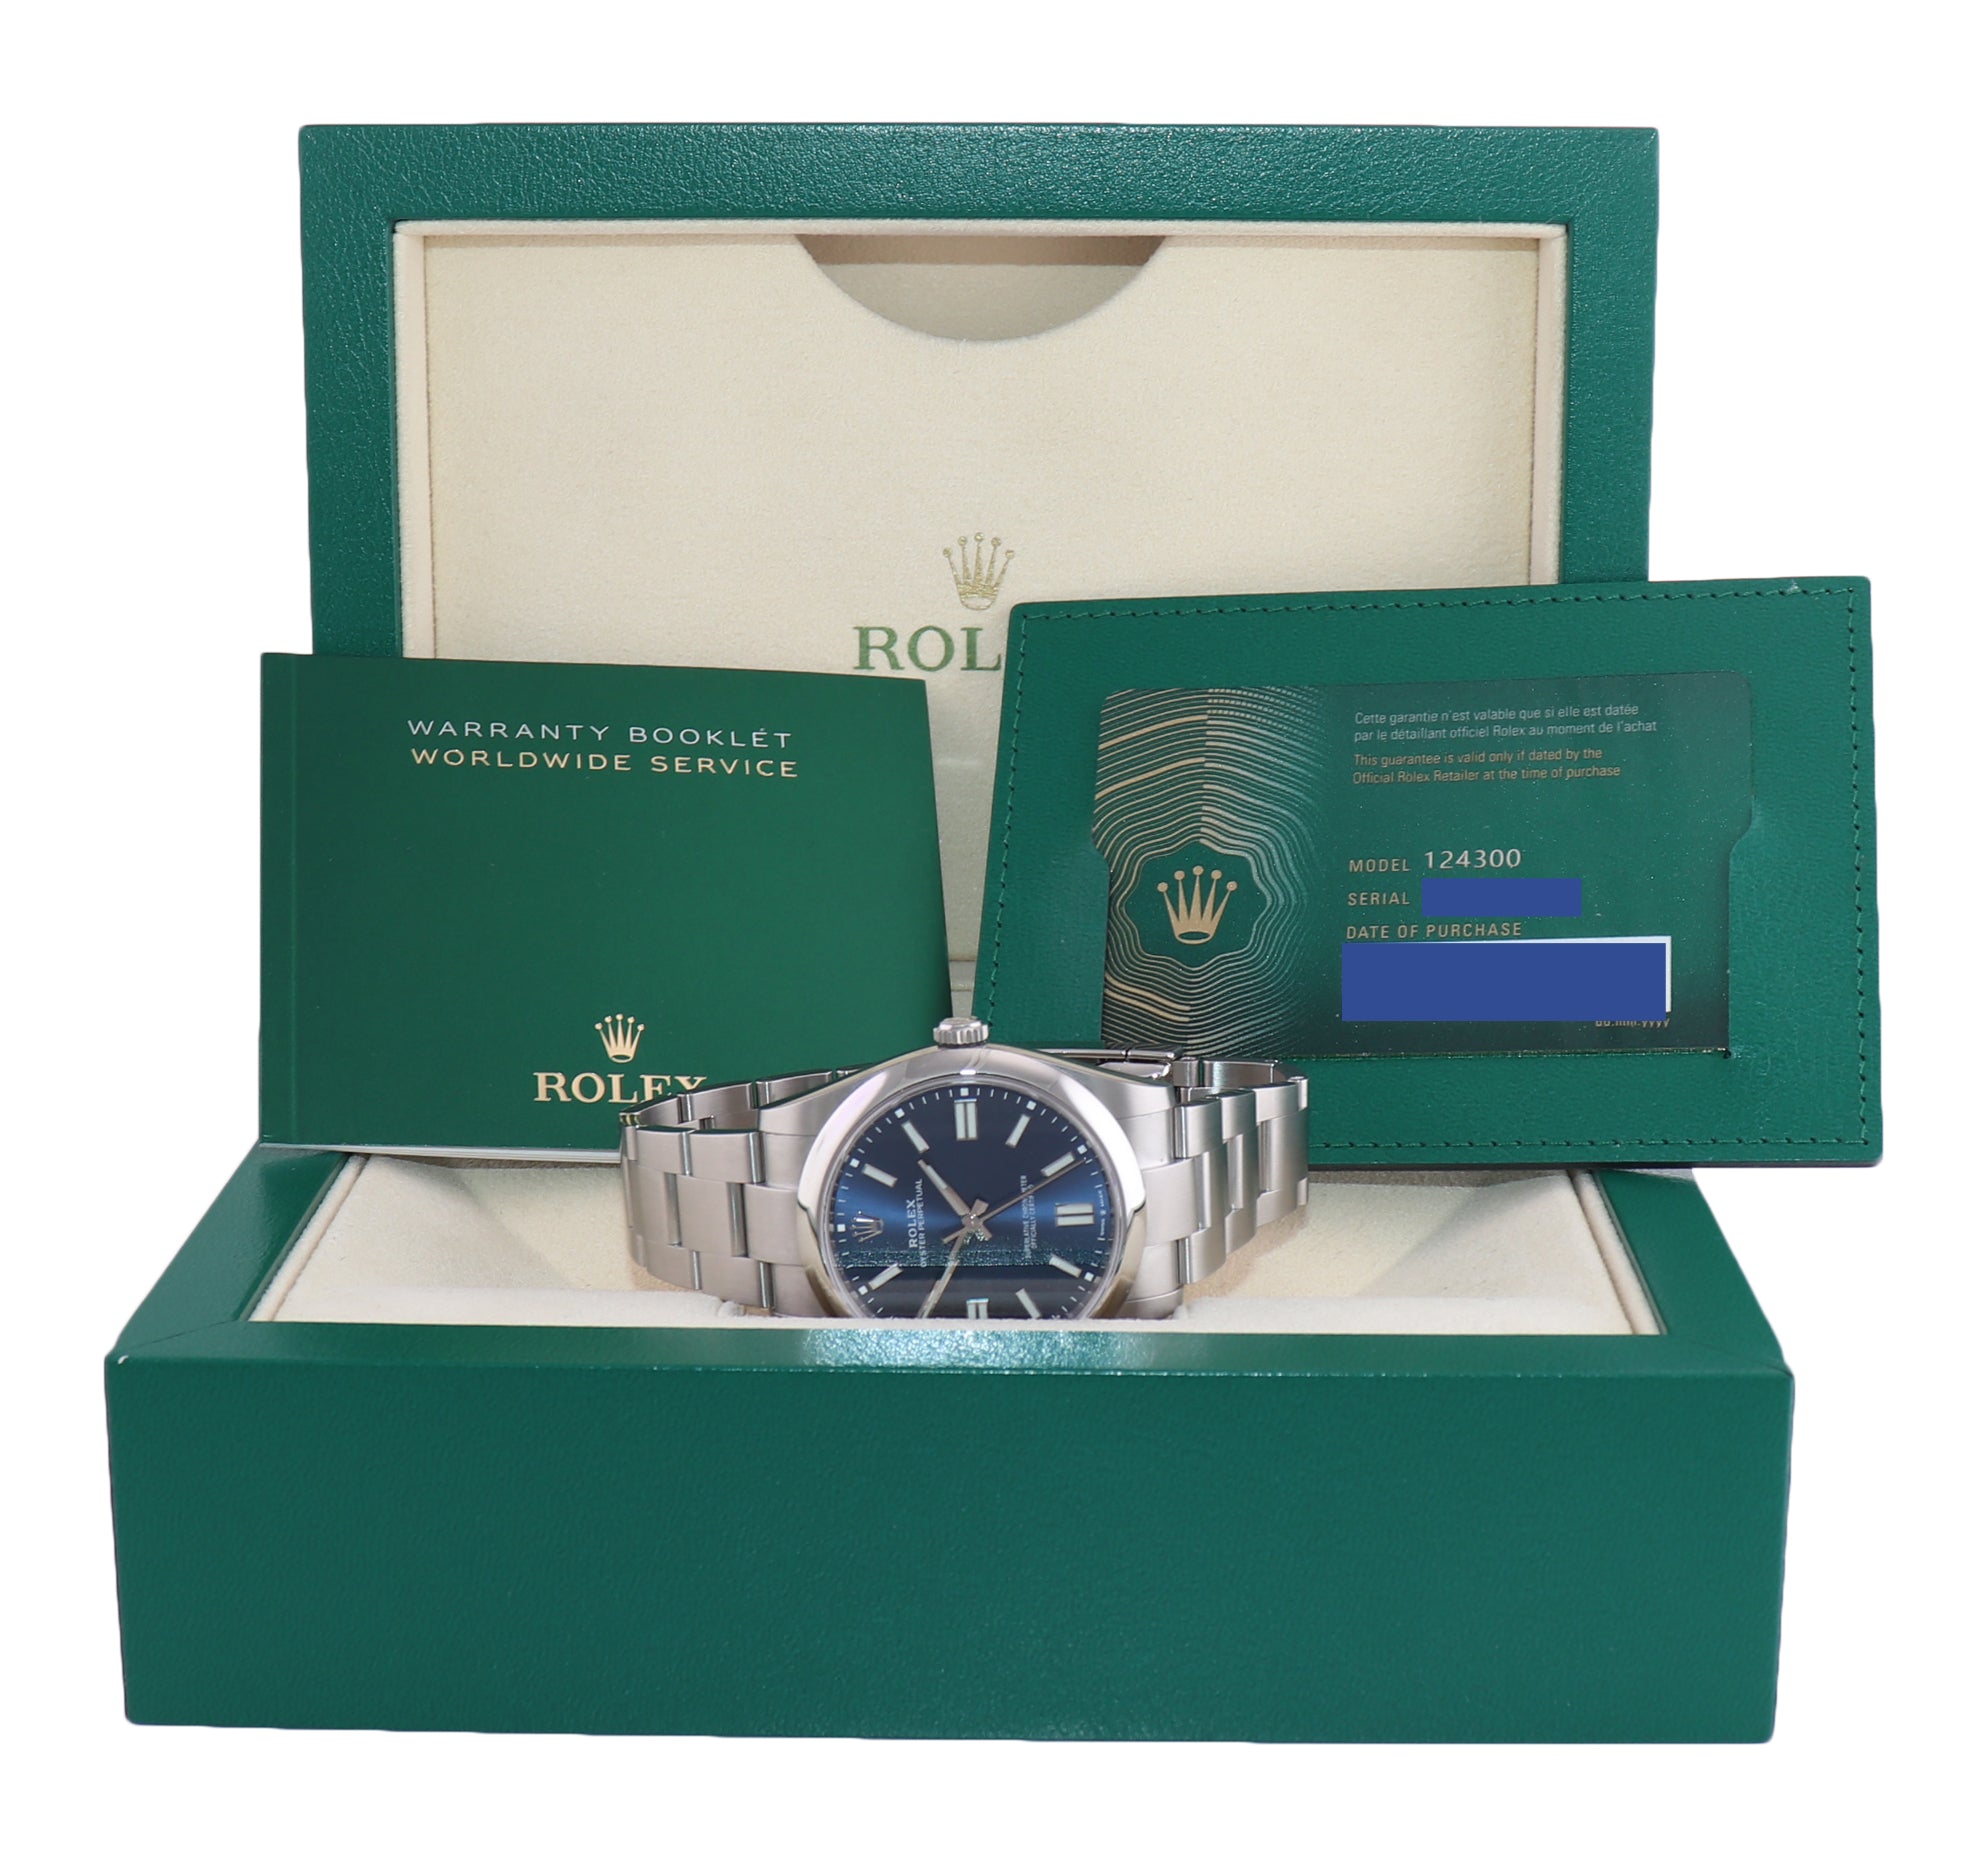 NEW 2021 PAPERS Rolex Oyster Perpetual 41mm Blue Stick Oyster Watch 124300 Box